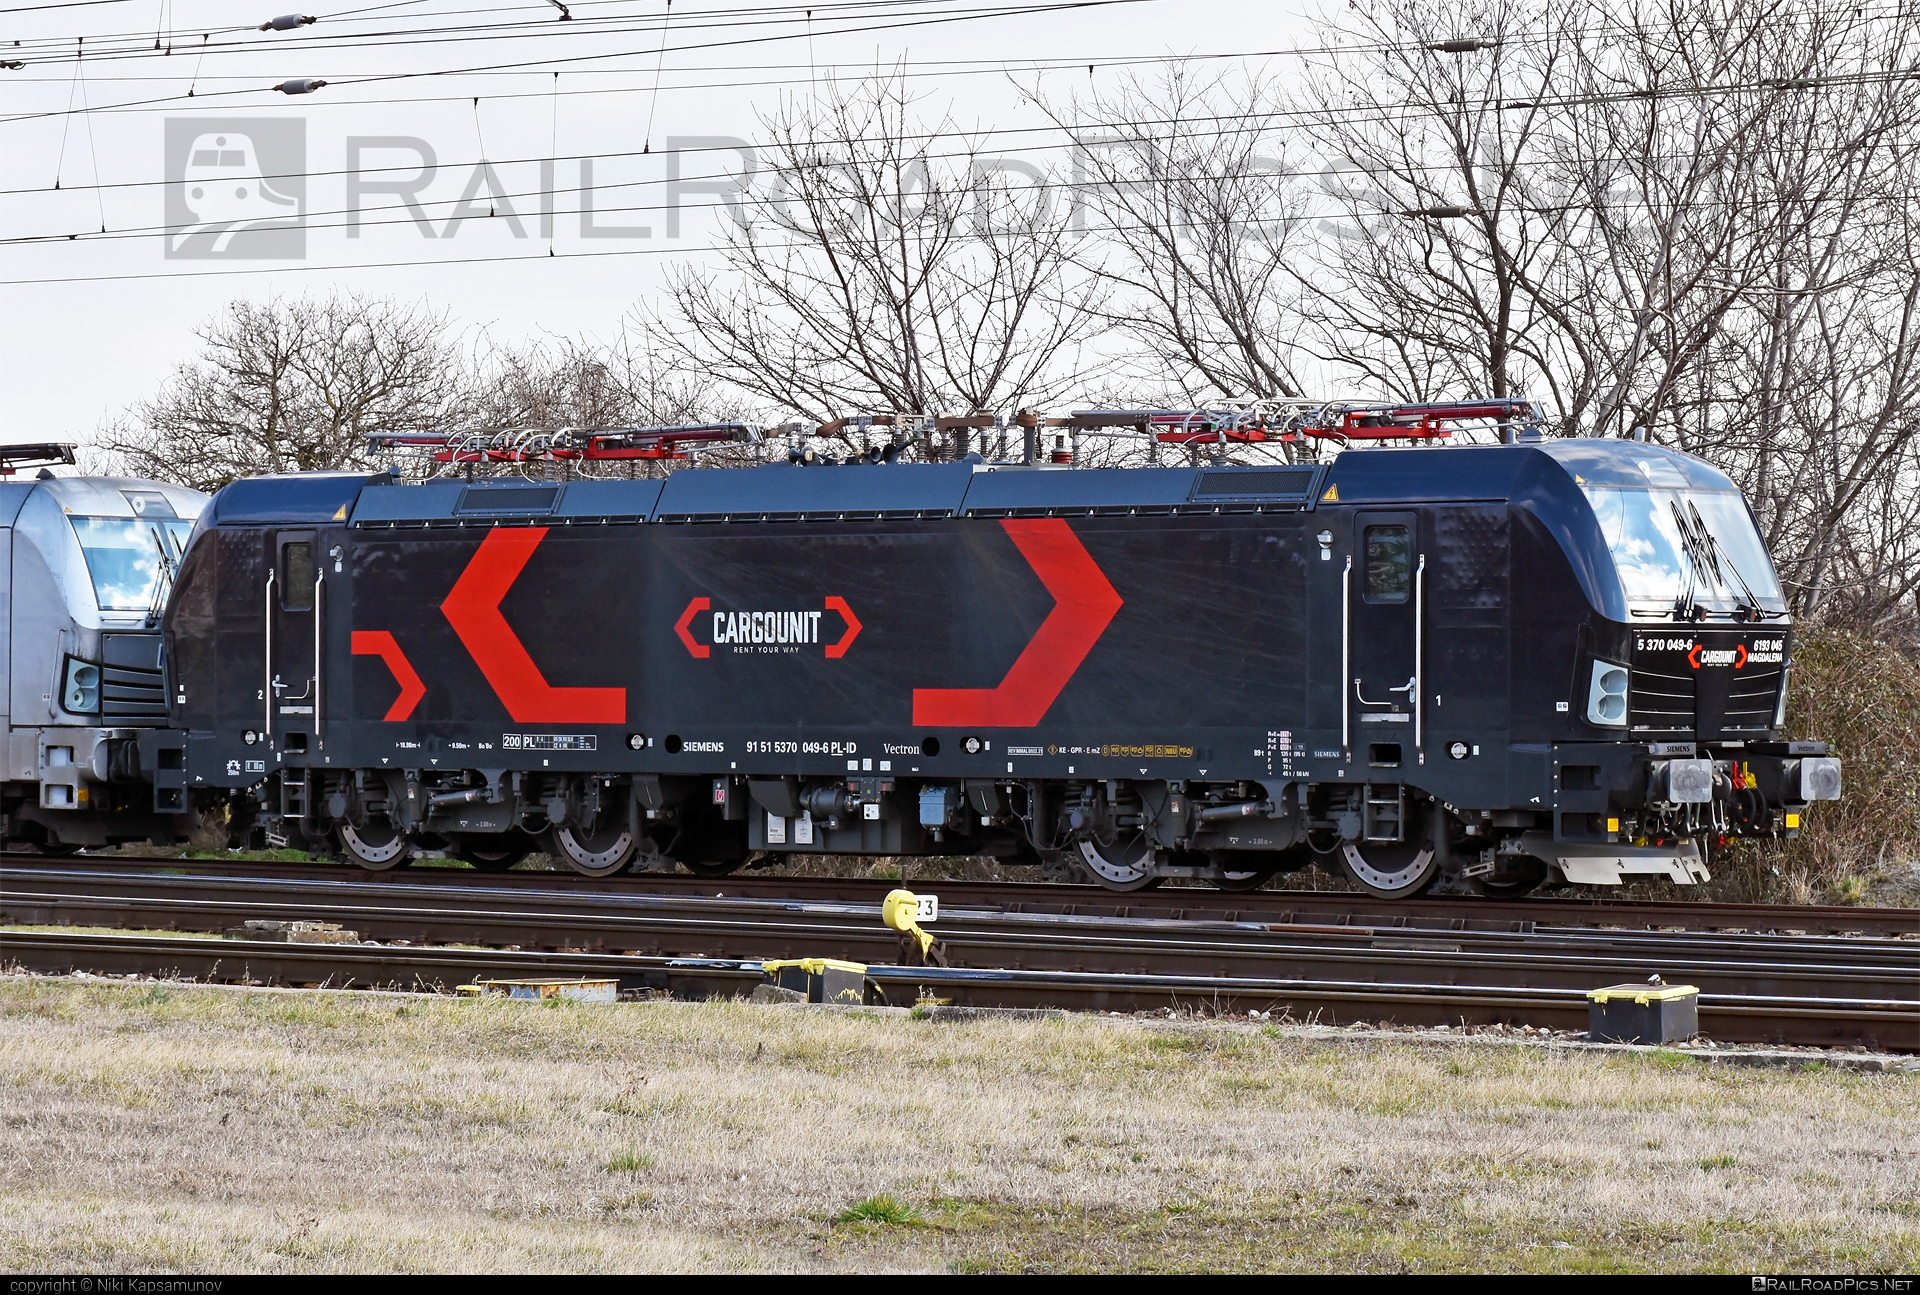 Siemens Vectron MS - 5 370 049-6 operated by METRANS, a.s. #IndustrialDivision #cargounit #hhla #metrans #siemens #siemensVectron #siemensVectronMS #vectron #vectronMS